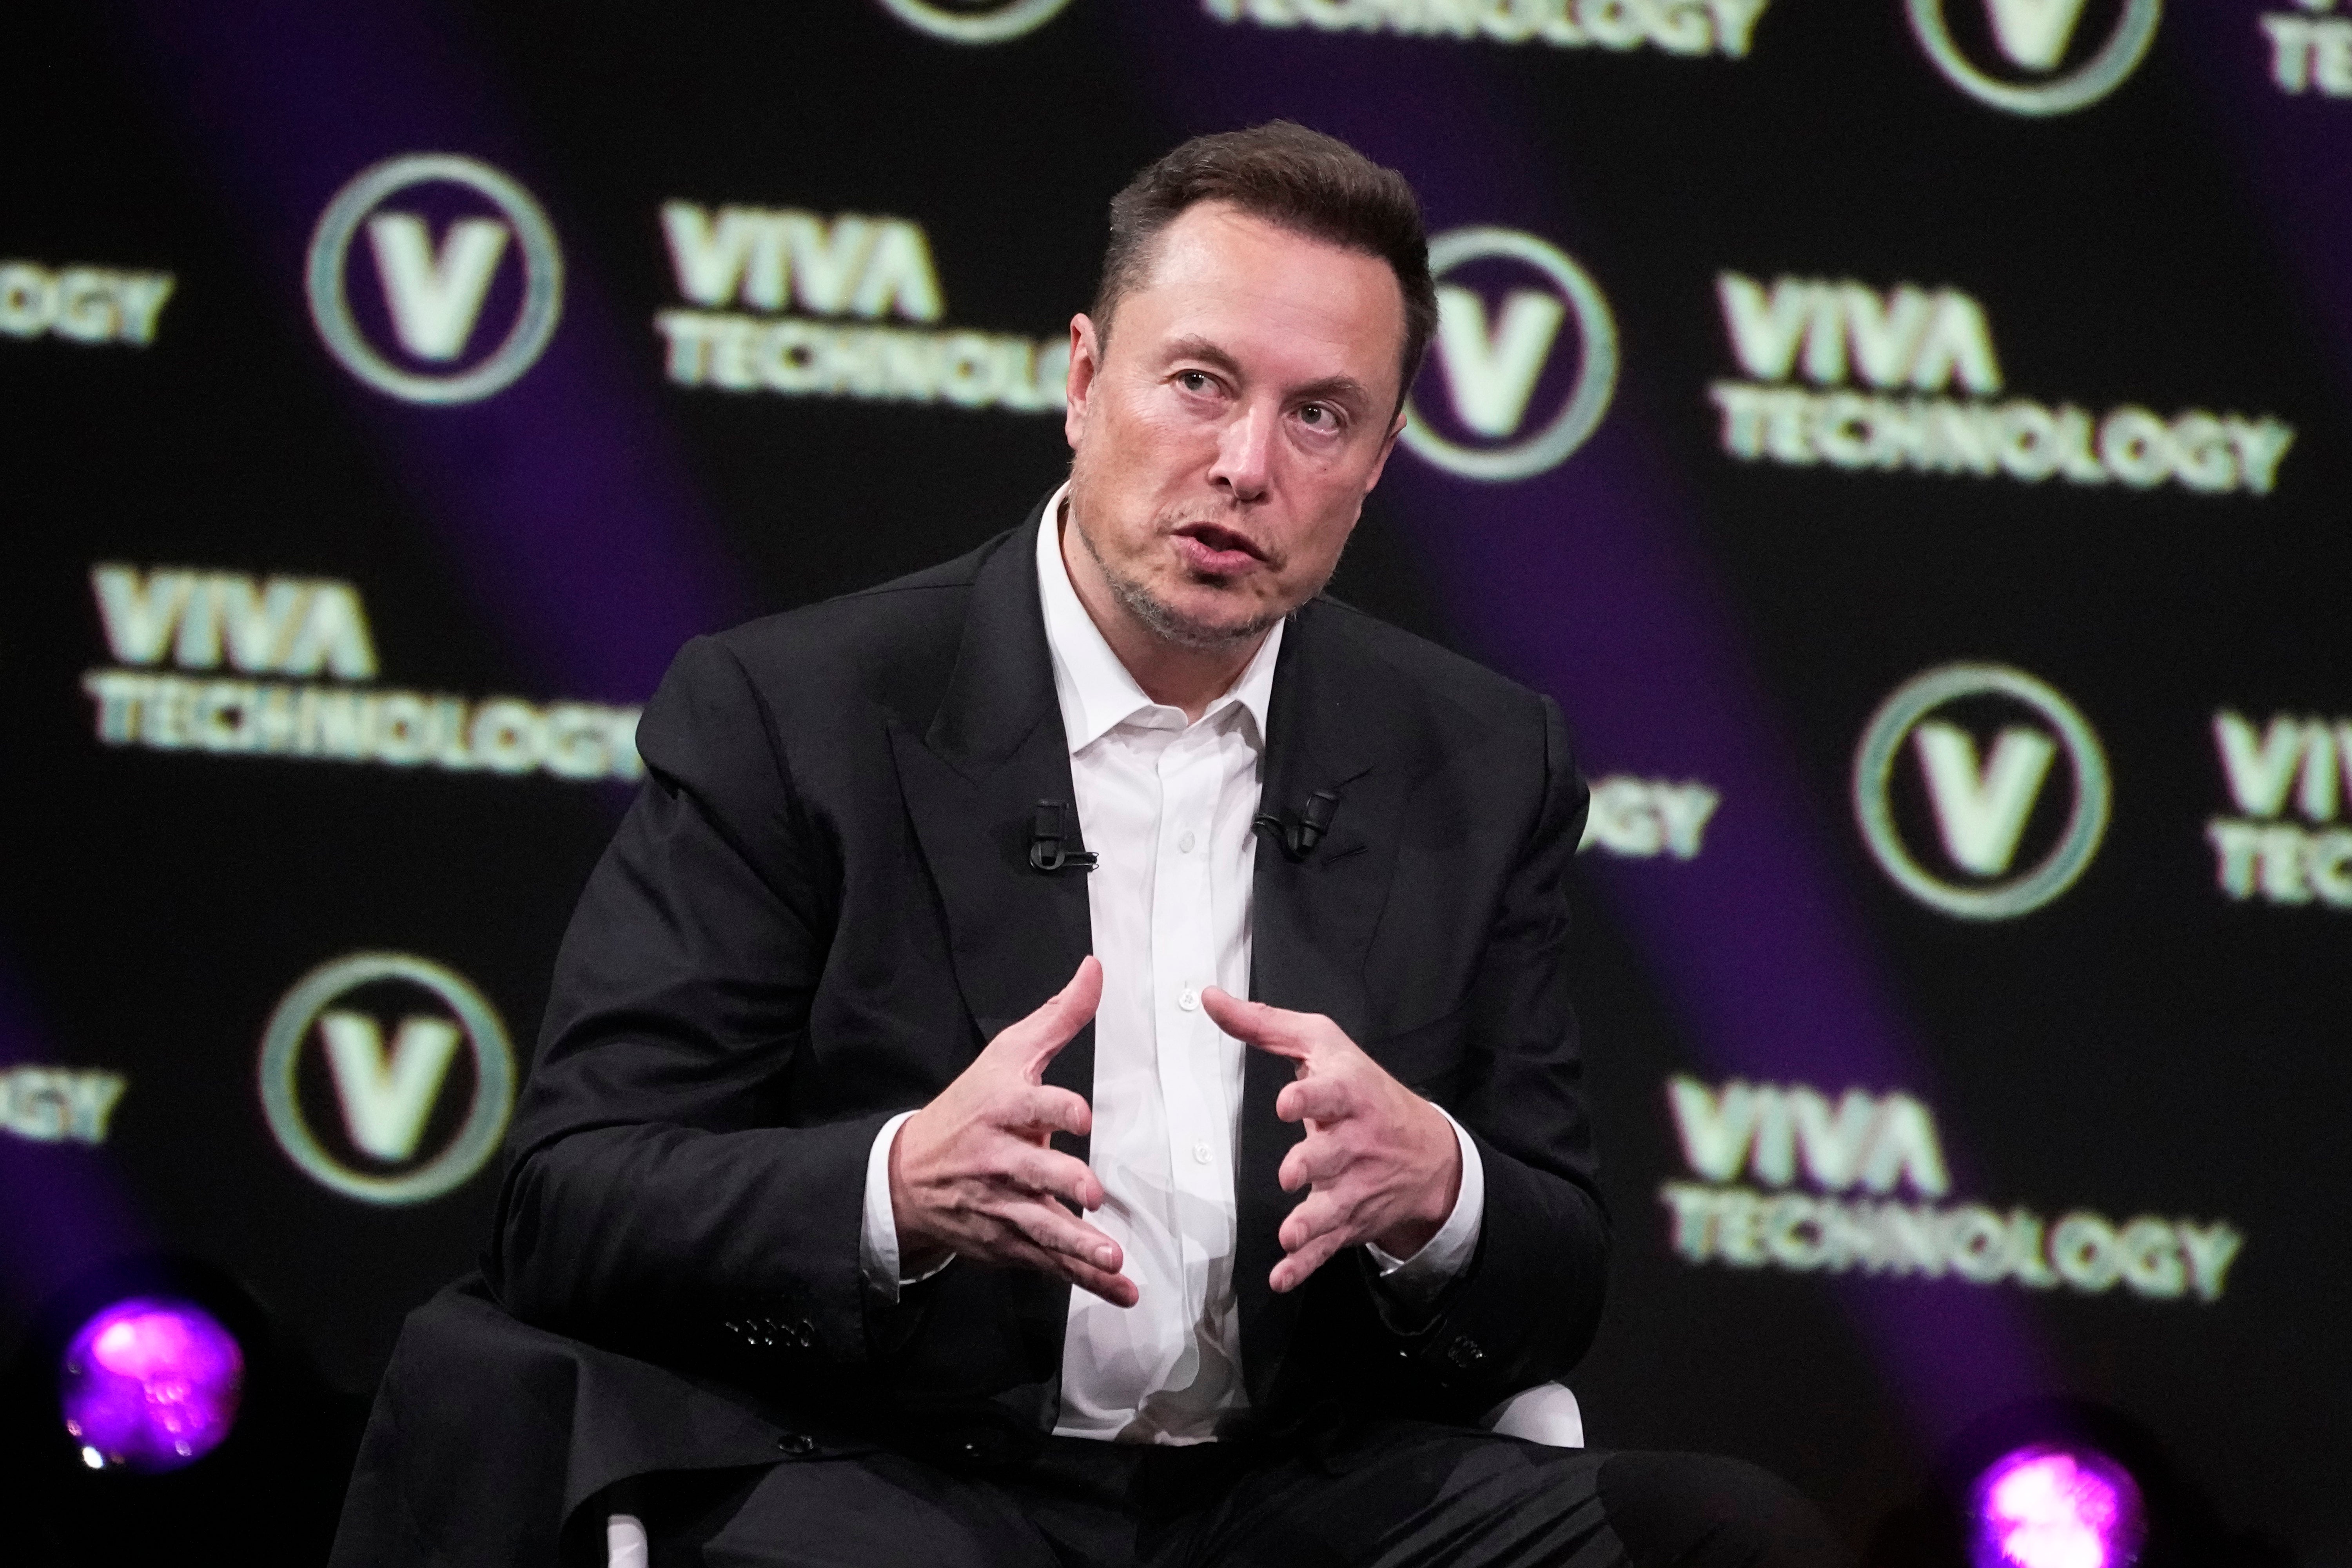 <p>Musk may soon discover to his cost that the world’s richest person still needs the little people</p>